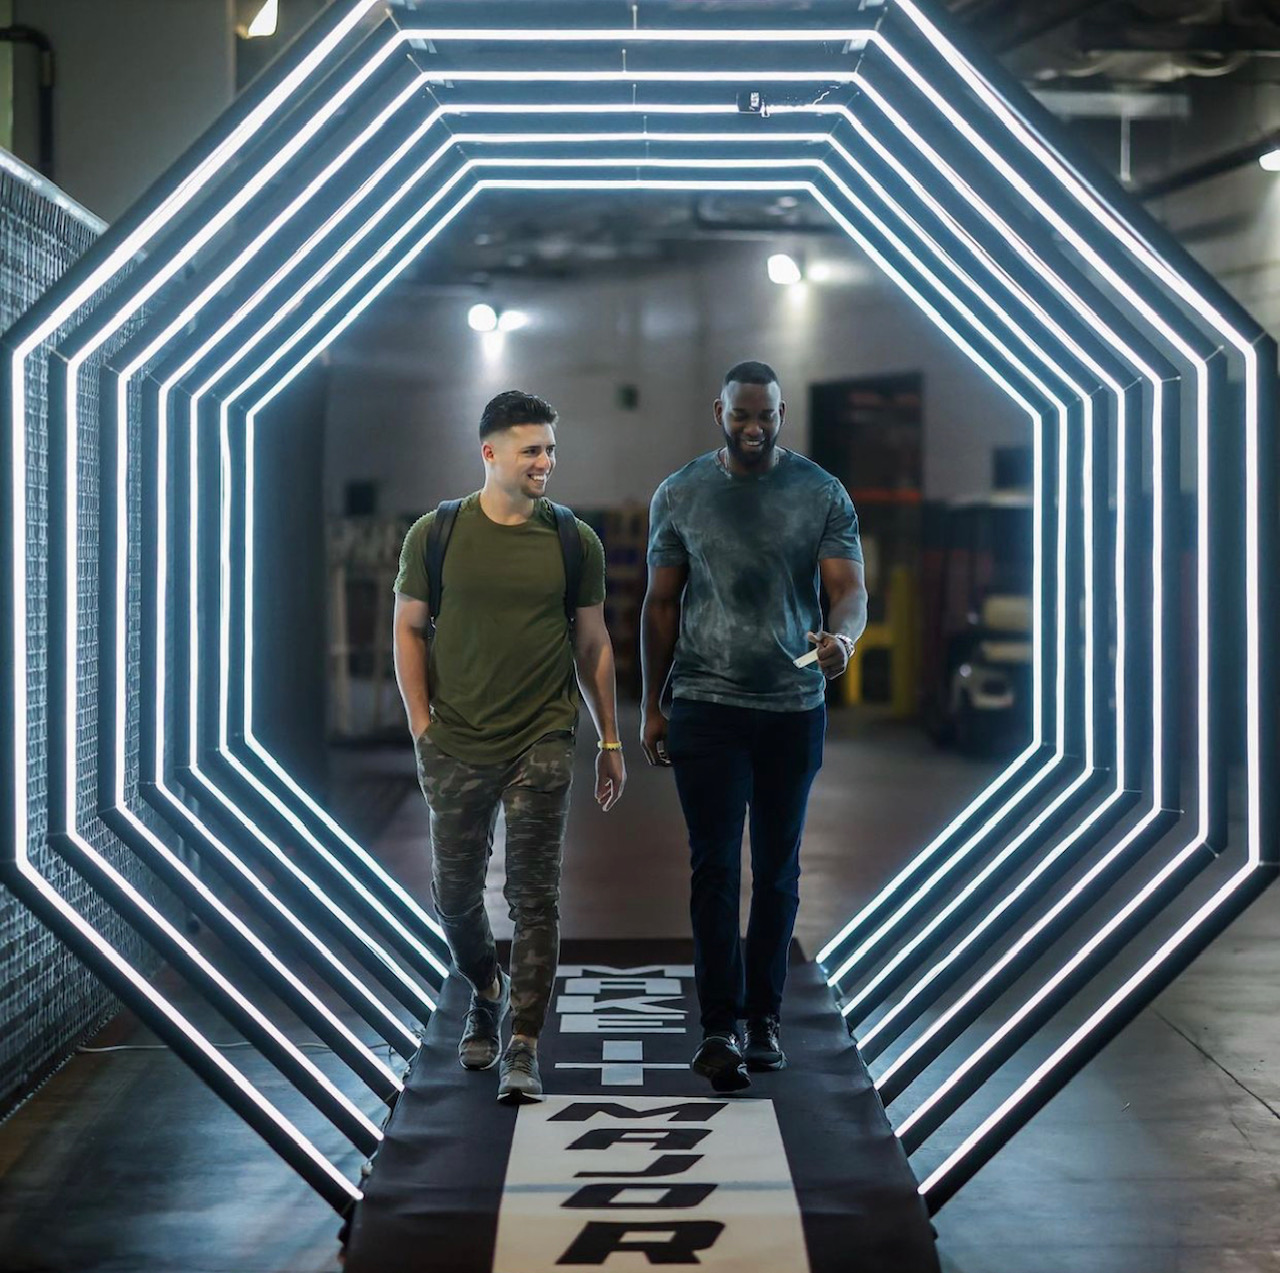 Yordan Alzarez (right) featured in our custom octagon tunnel for MLB's "Make It Major" campaign for the World Series 2021.